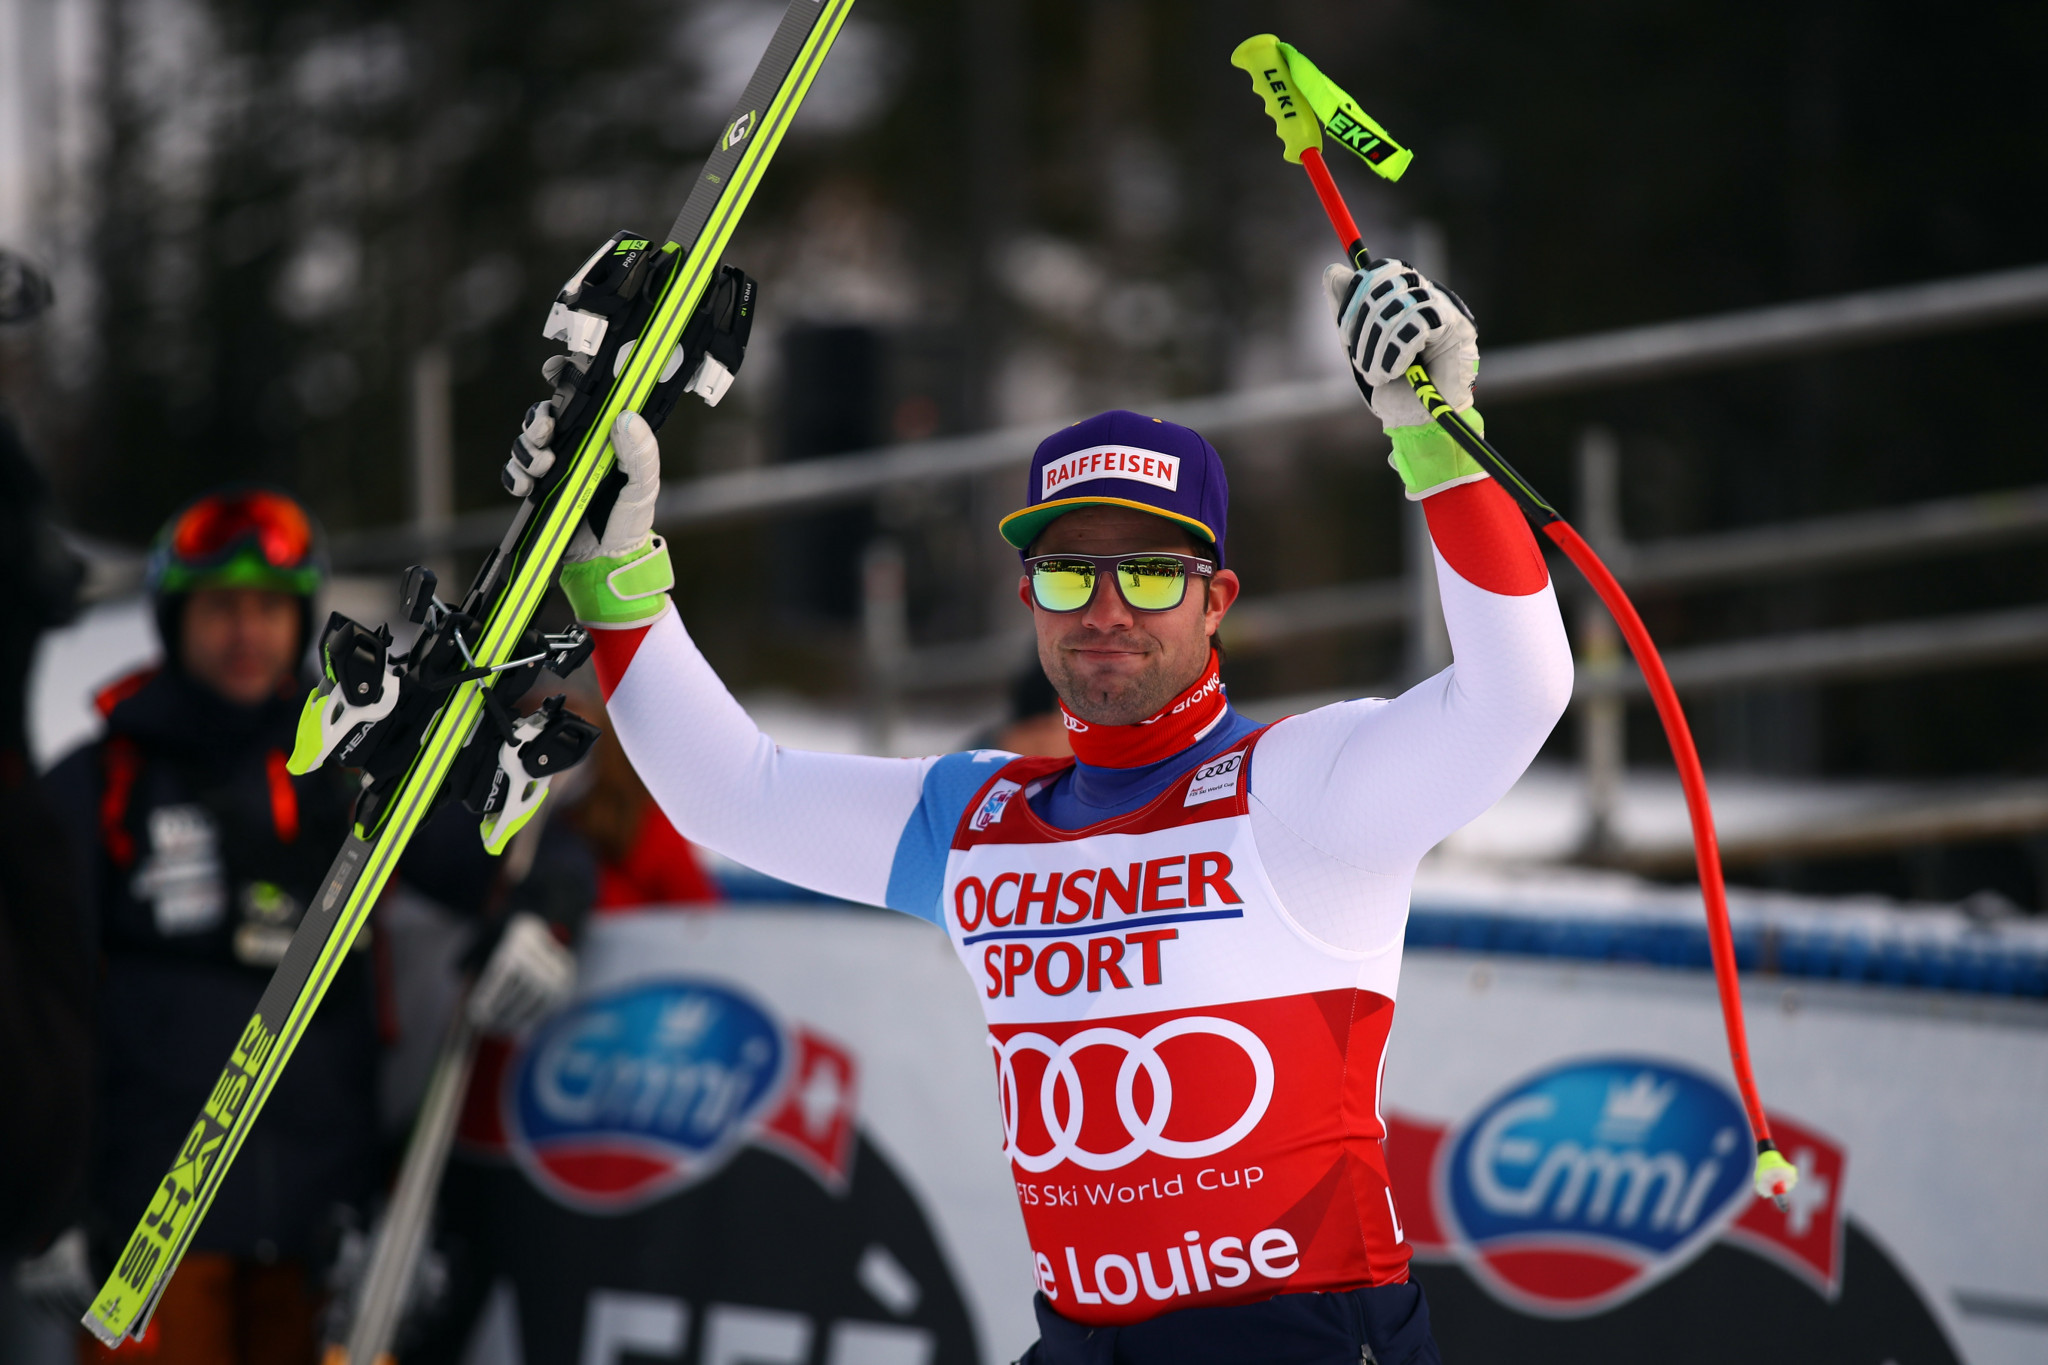 World champion Feuz wins downhill event at FIS Alpine Skiing World Cup in Lake Louise